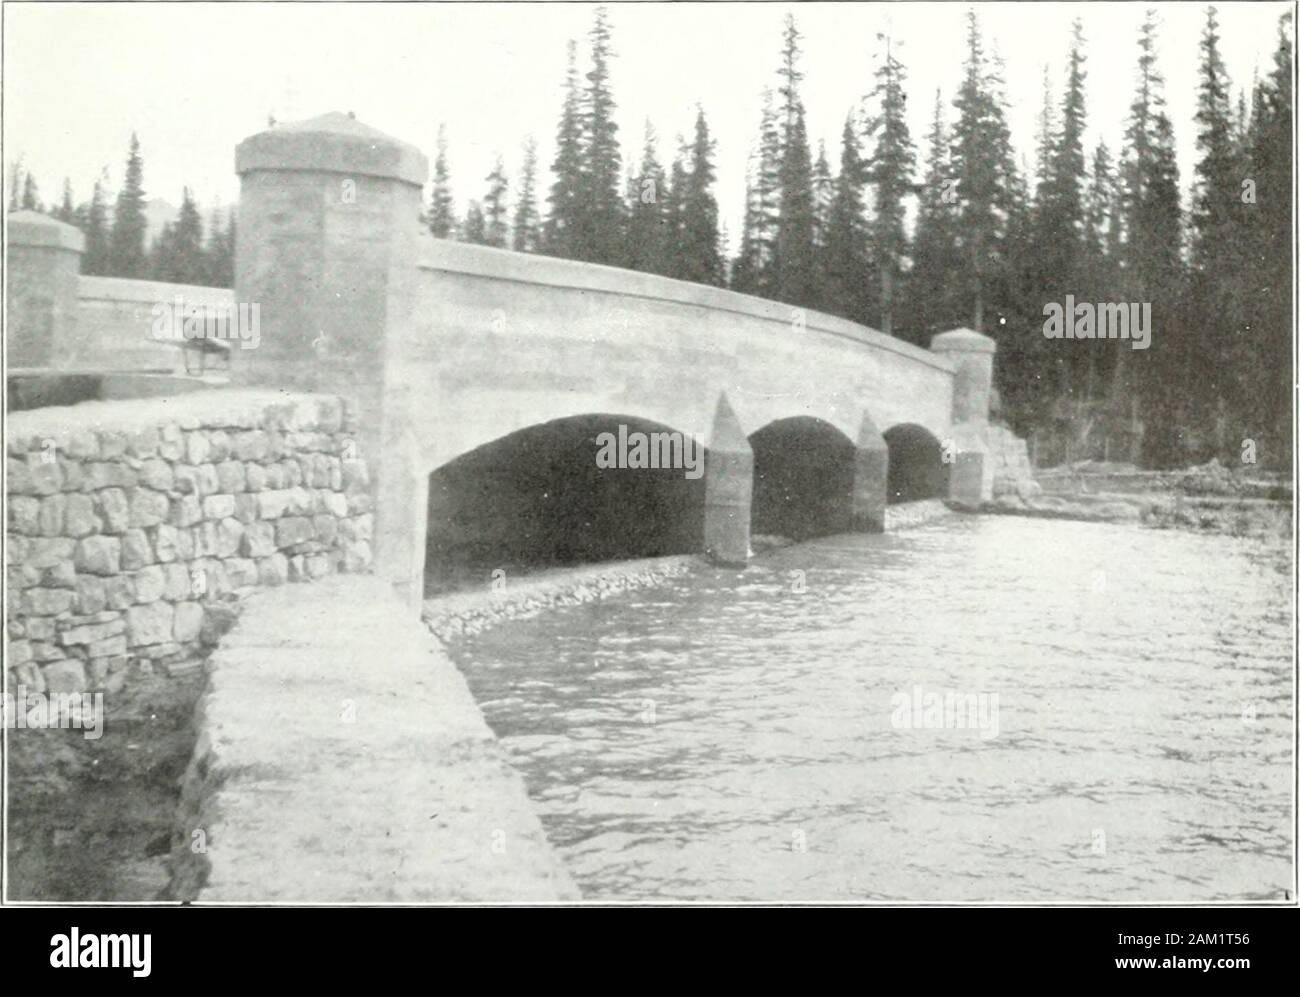 Sessional papers of the Dominion of Canada 1914 . Lake Louise Power Development. View of Lake.. ]&gt;akf LiM,i^&gt; IwAi-i I). .. i..j,iij( 111. I i.,^lrt.ini t,ie&lt; ..I lliid^i Stock Photo